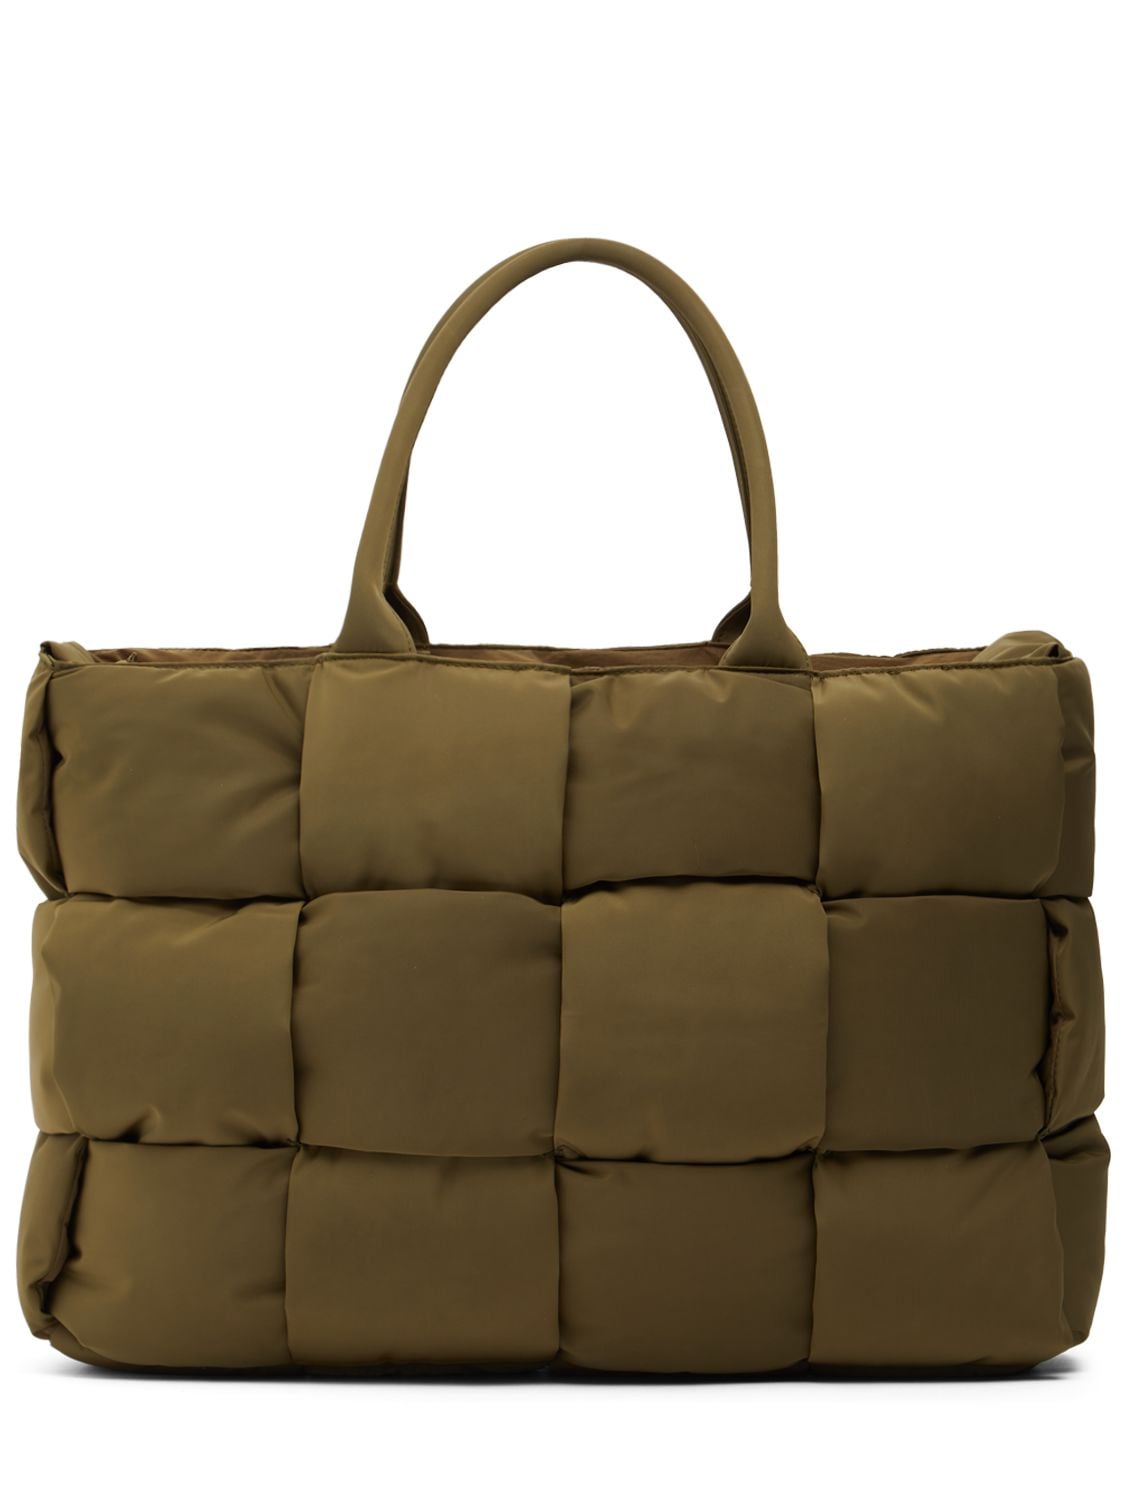 Image of Large Arco Padded Tech Tote Bag